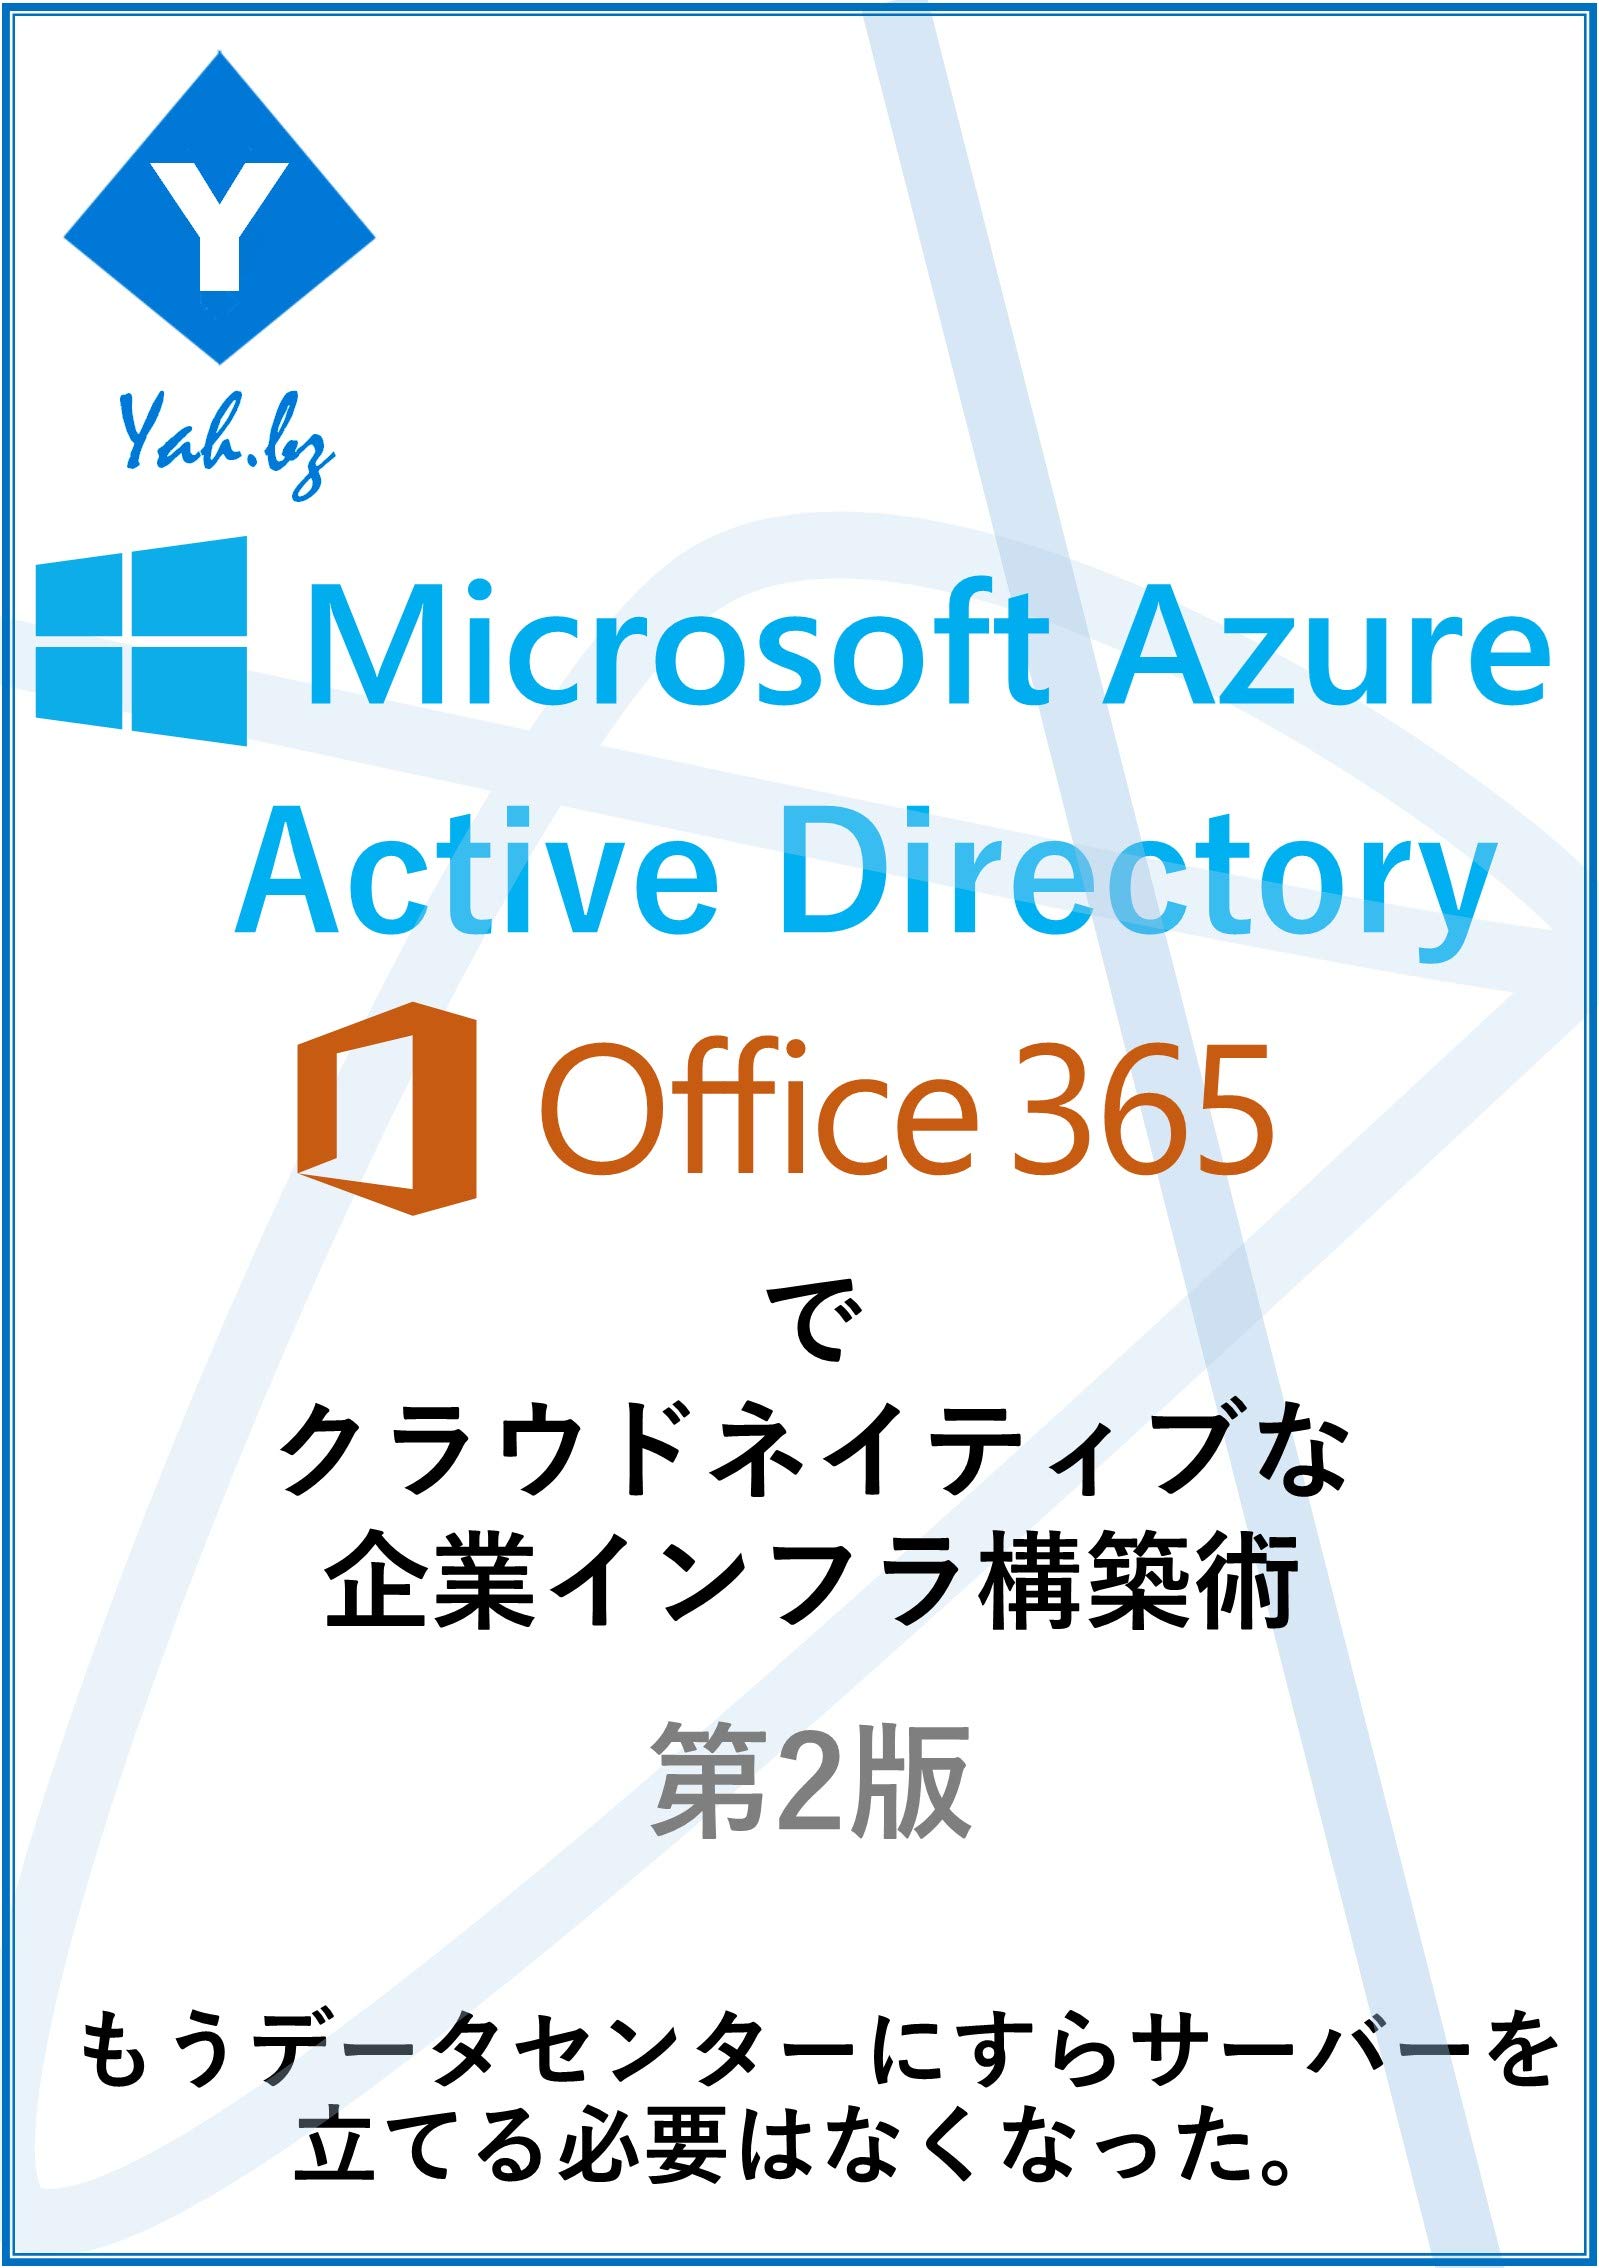 How to deploy your corporate IT infrastructure by Azure Active Directry and Office 365: You do not have to build servers in your office as well as in data center (Japanese Edition)